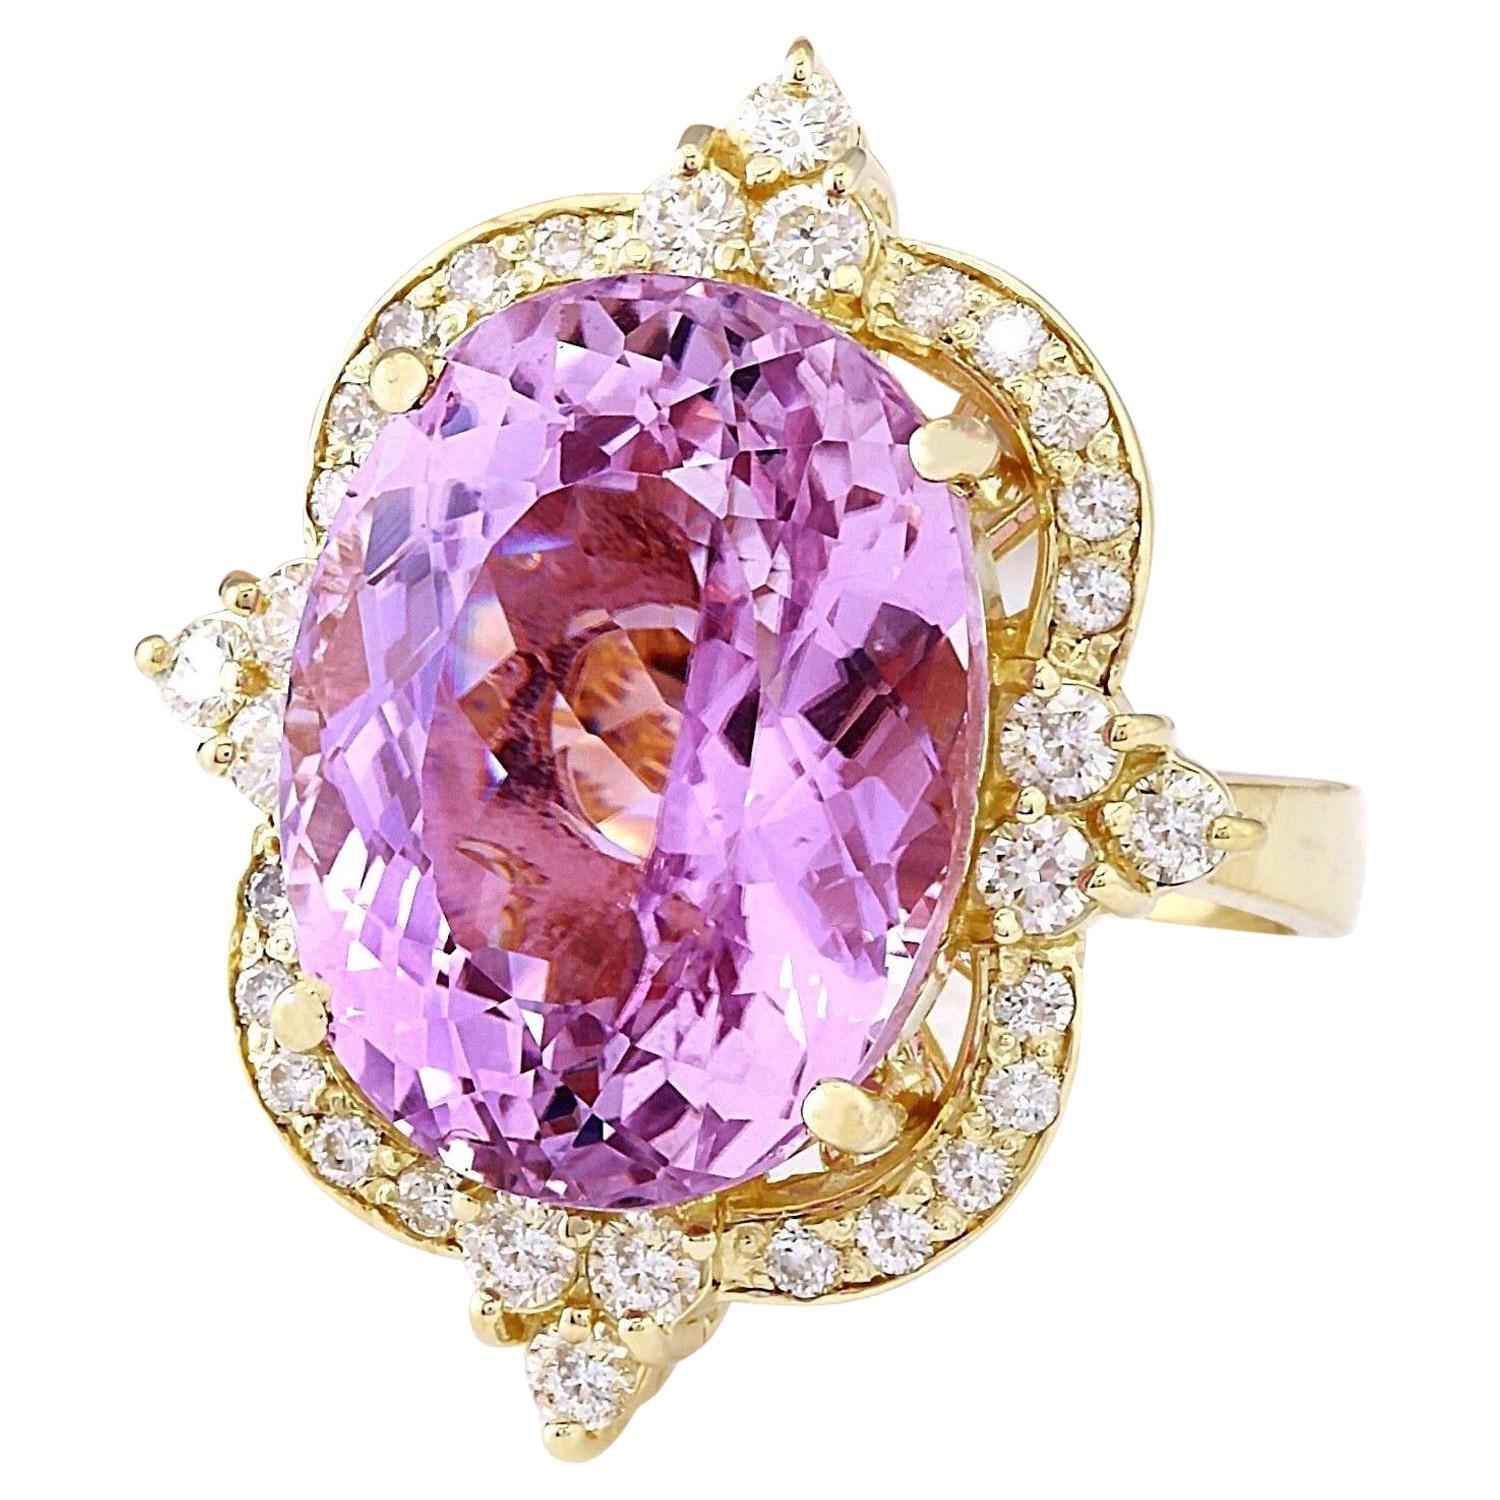 19.89 Carat Natural Kunzite 14K Solid Yellow Gold Diamond Ring
 Item Type: Ring
 Item Style: Cocktail
 Material: 14K Yellow Gold
 Mainstone: Kunzite
 Stone Color: Pink
 Stone Weight: 18.99 Carat
 Stone Shape: Oval
 Stone Quantity: 1
 Stone